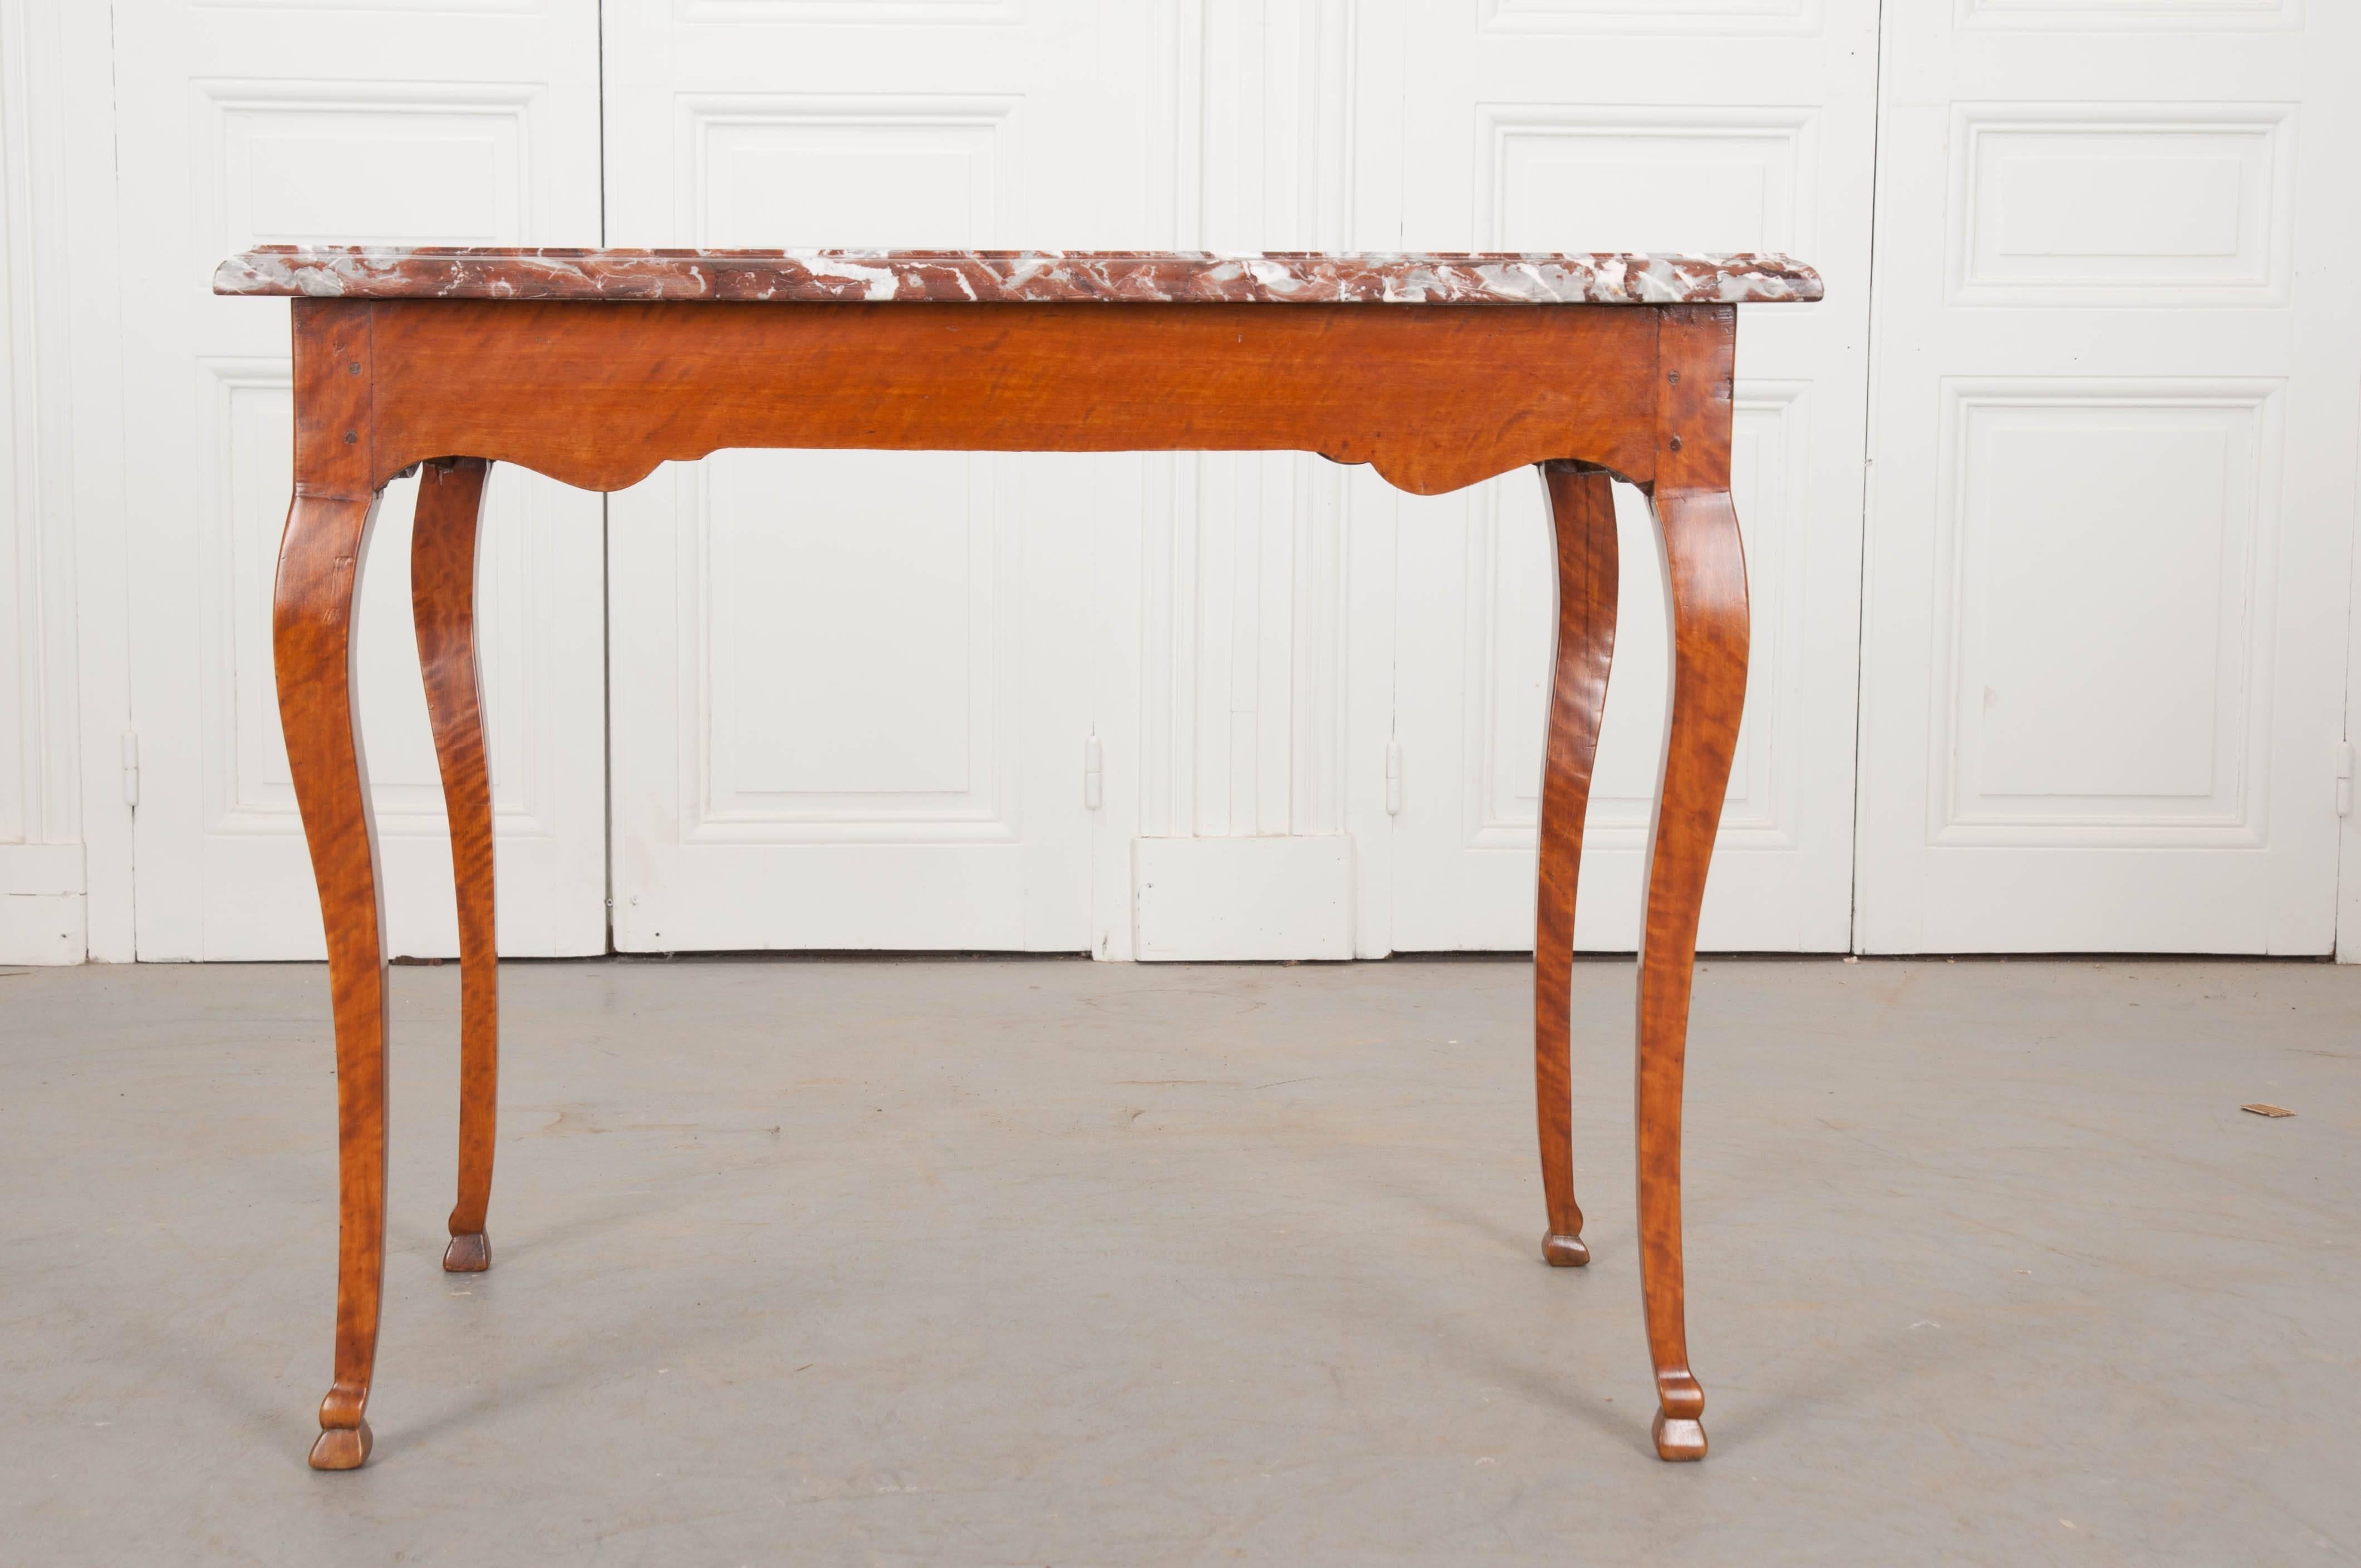 A breathtaking birch writing table, made at the beginning if the 19th century in France. The marble top is a rich cinnamon color, with vibrant flashed of white throughout, and a wonderful finished edge. The base is made of solid birch with beautiful